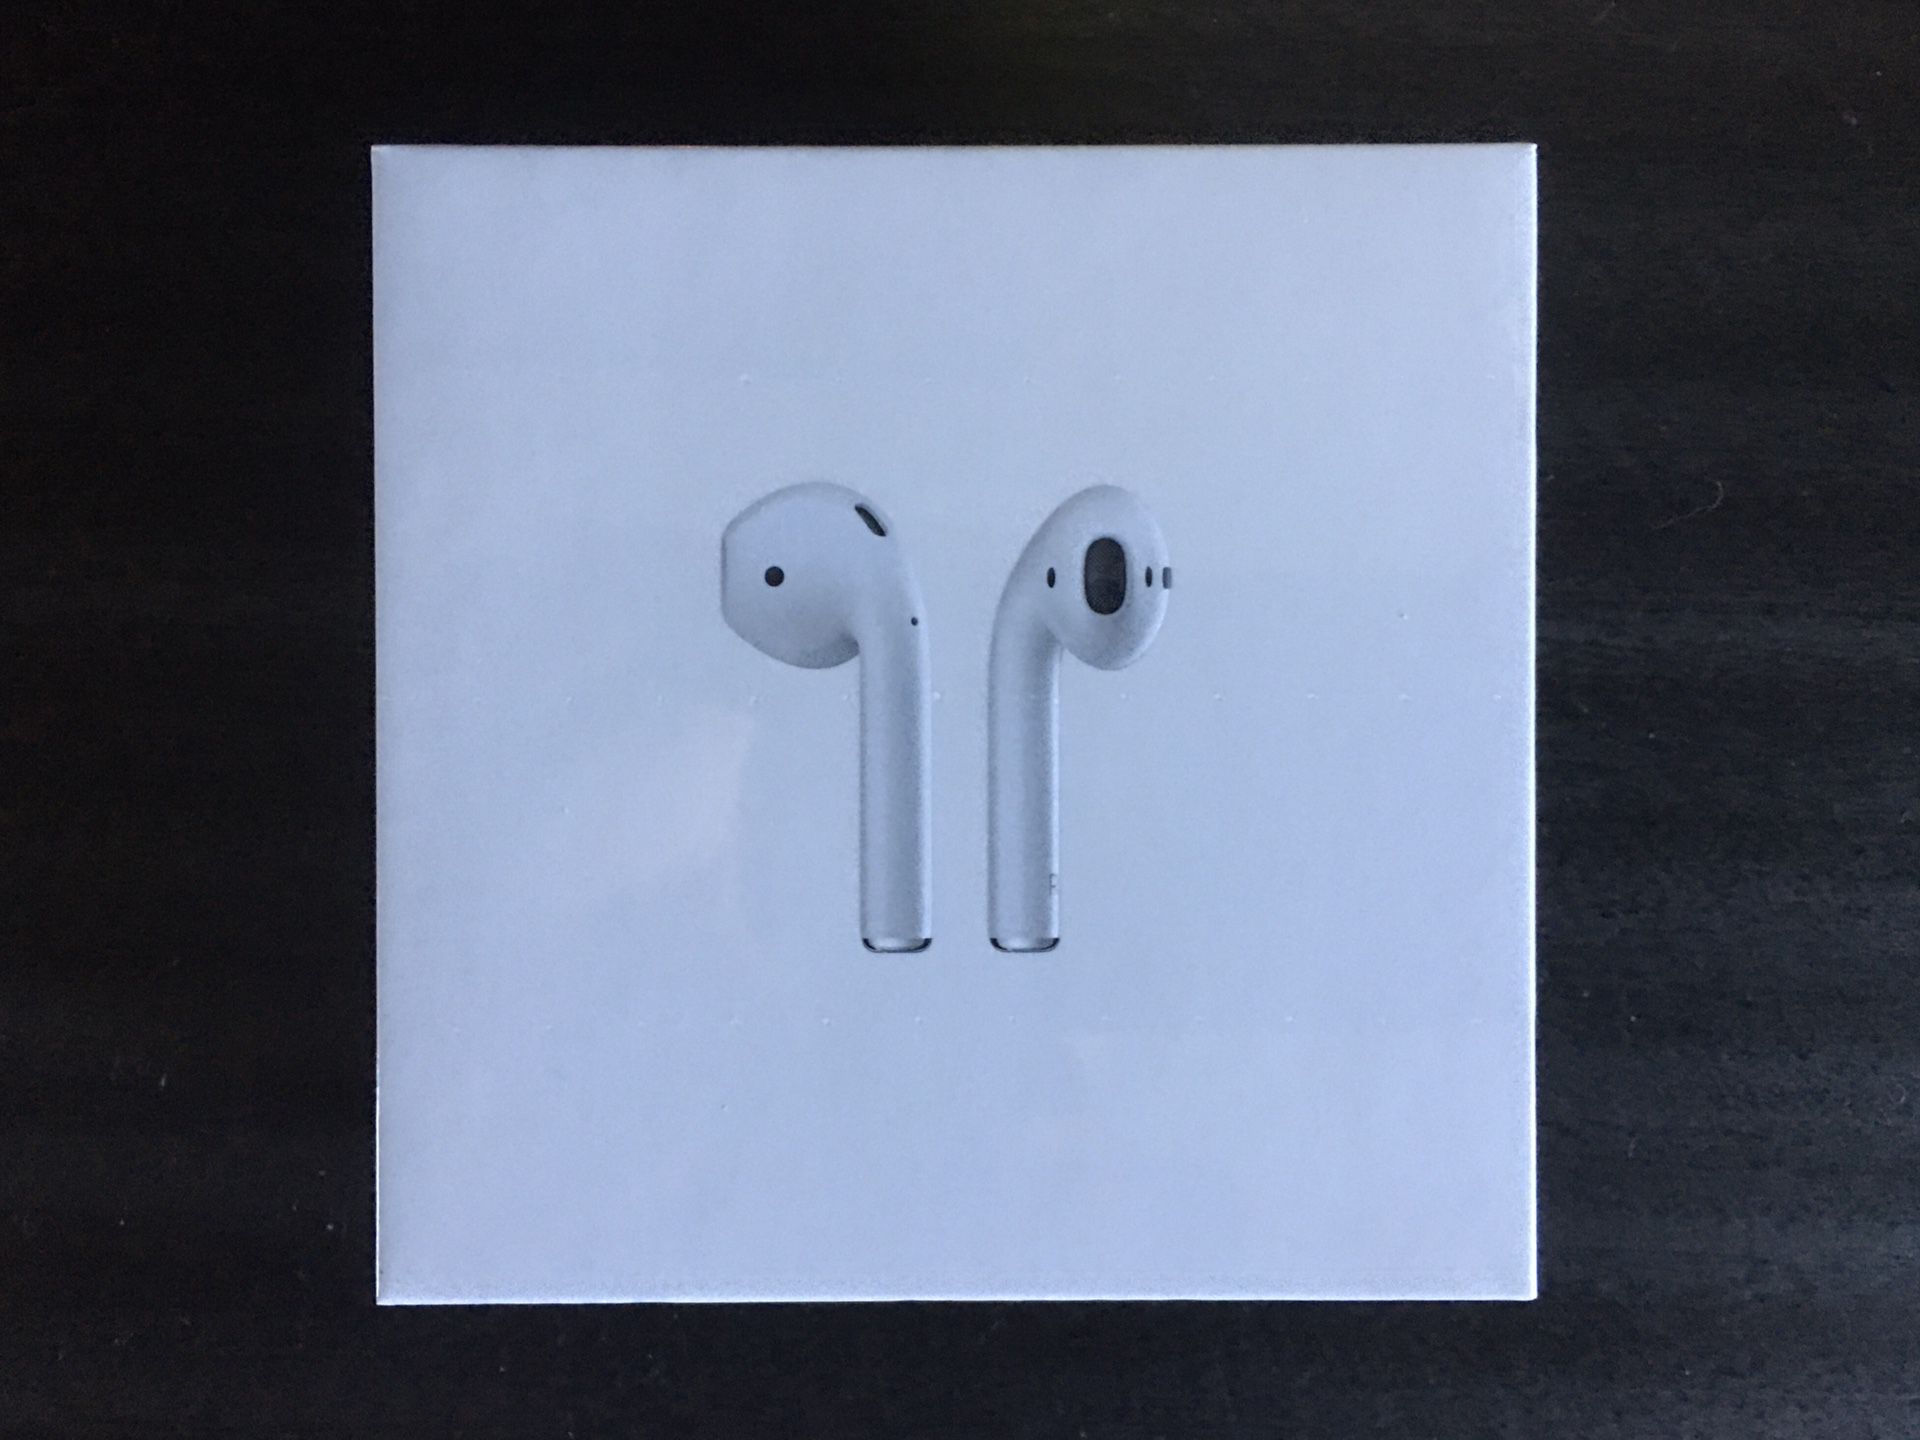 AirPods brand new (sealed in box).